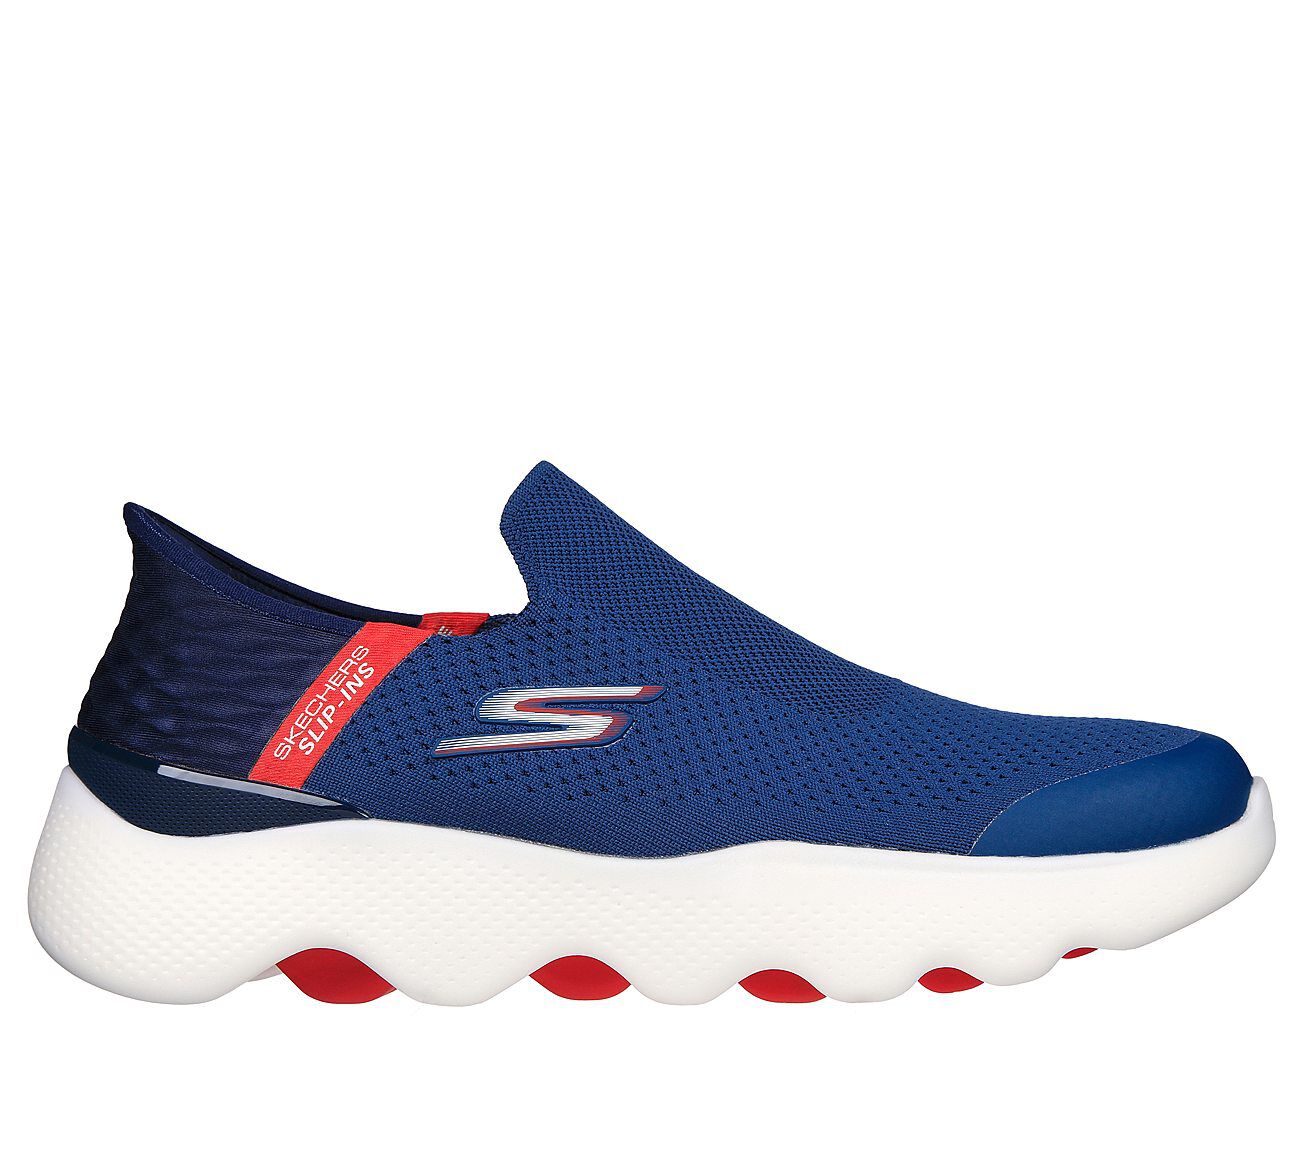 Buy Stretch Fit Shoes For Men Online | Skechers India